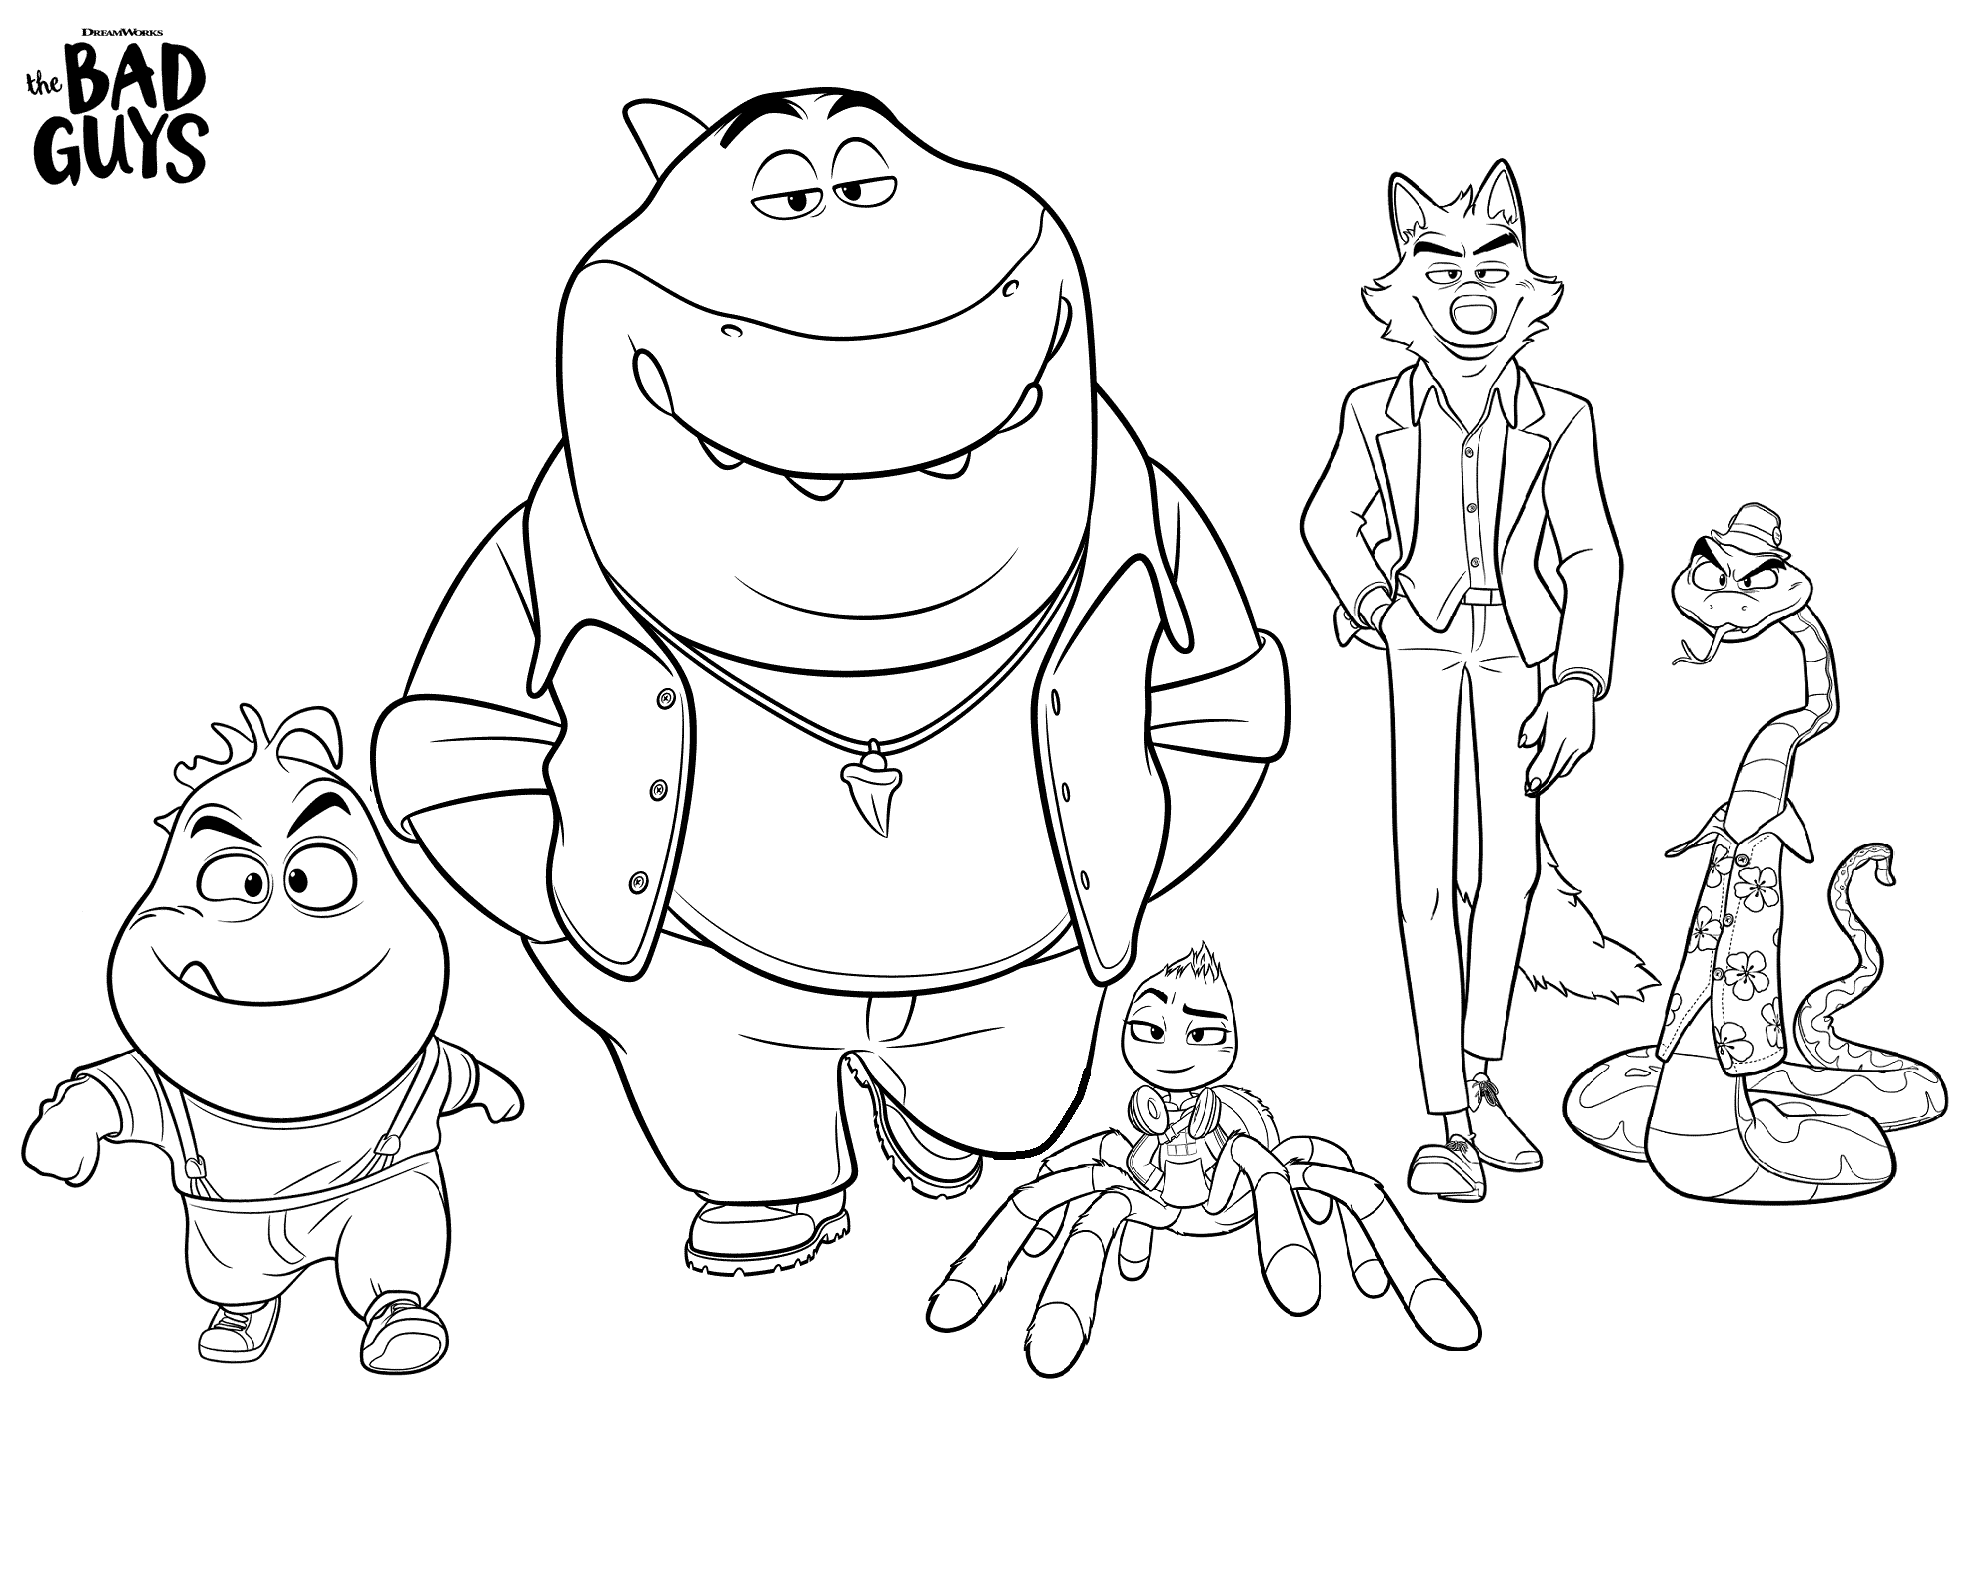 The Bad Guys Gang Coloring Pages - The Bad Guys Coloring Pages - Coloring  Pages For Kids And Adults